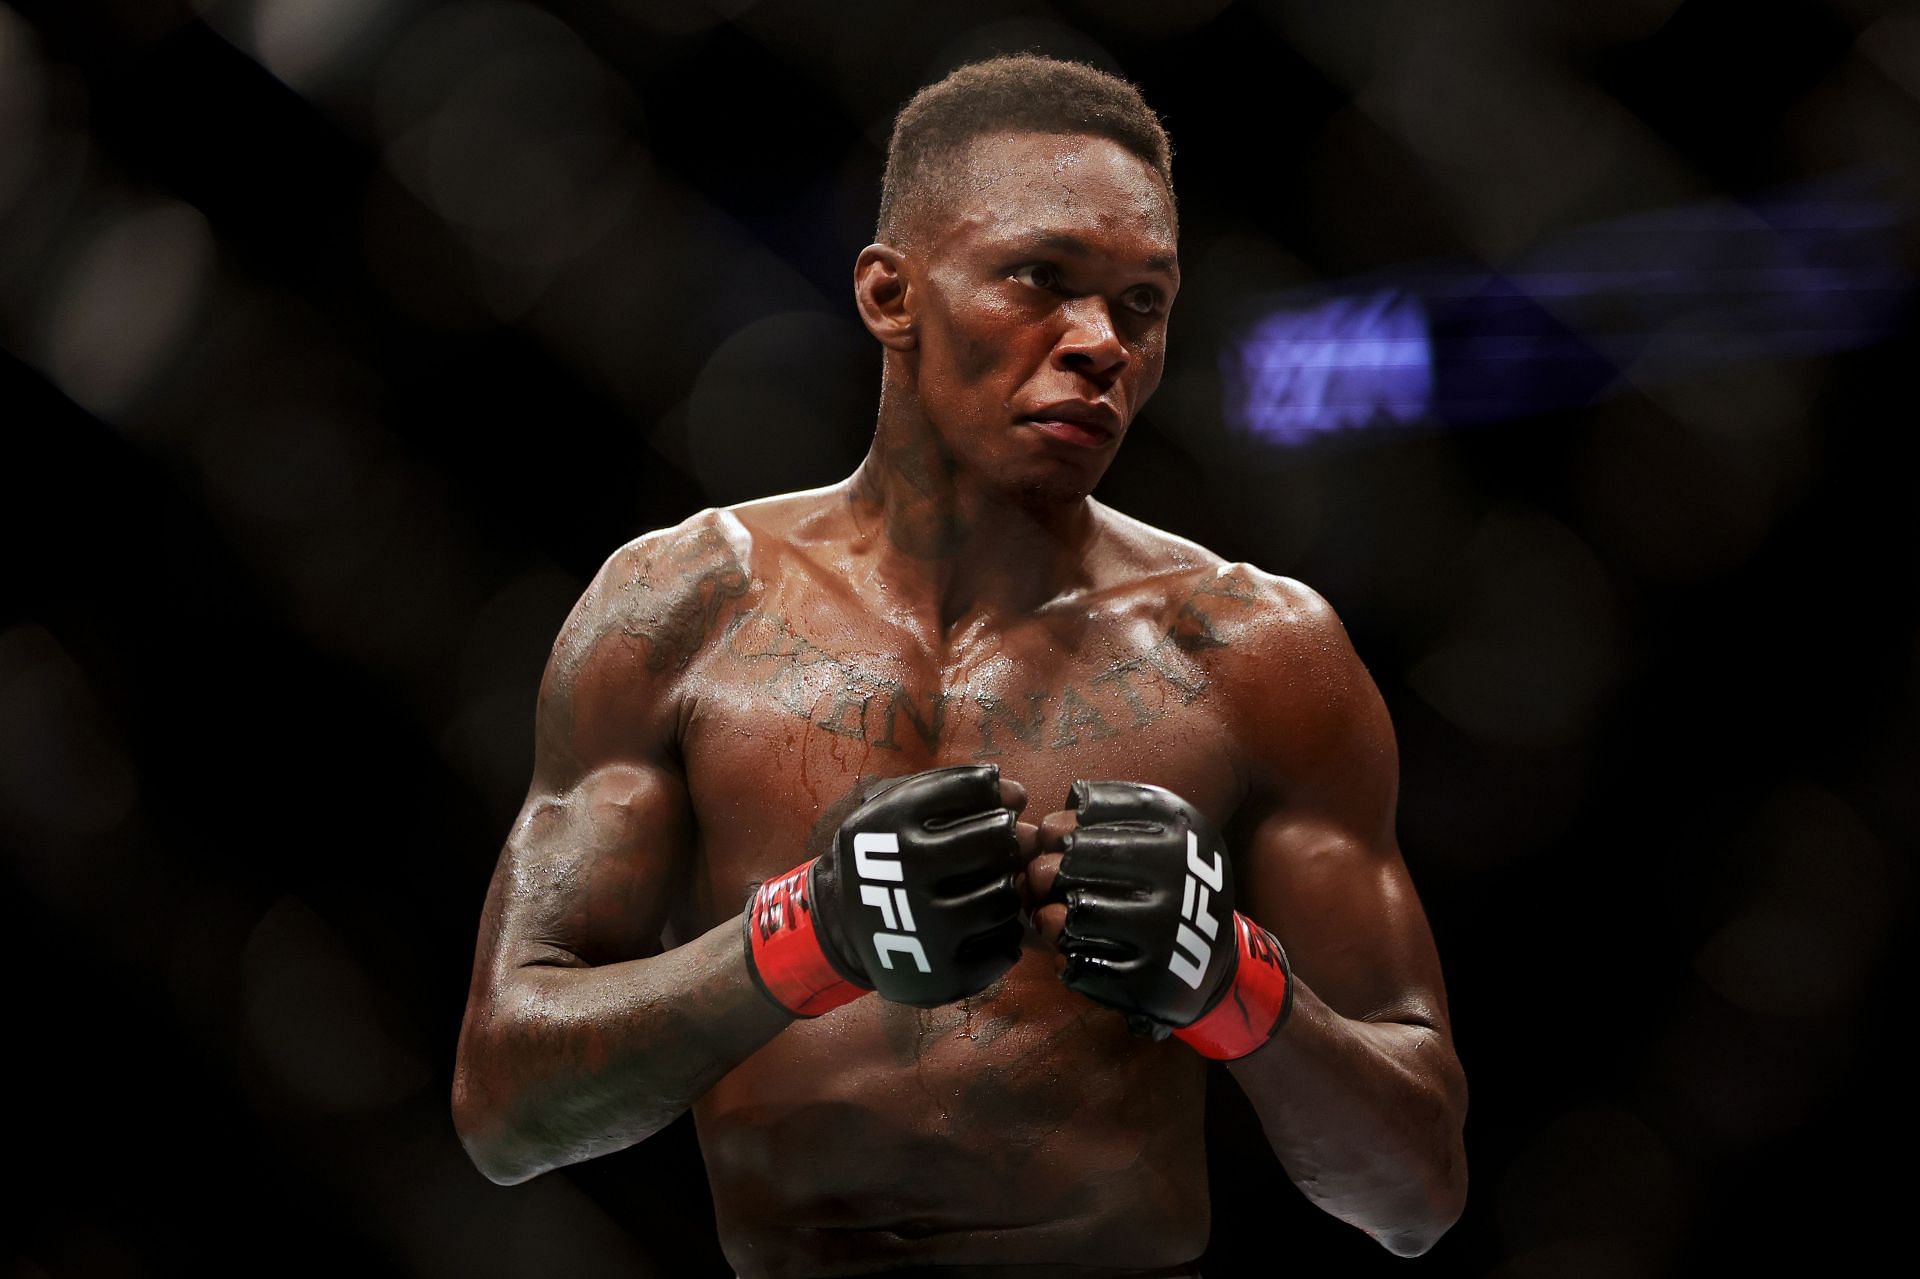 If Adesanya wants Pereira, then the UFC should put the fight together